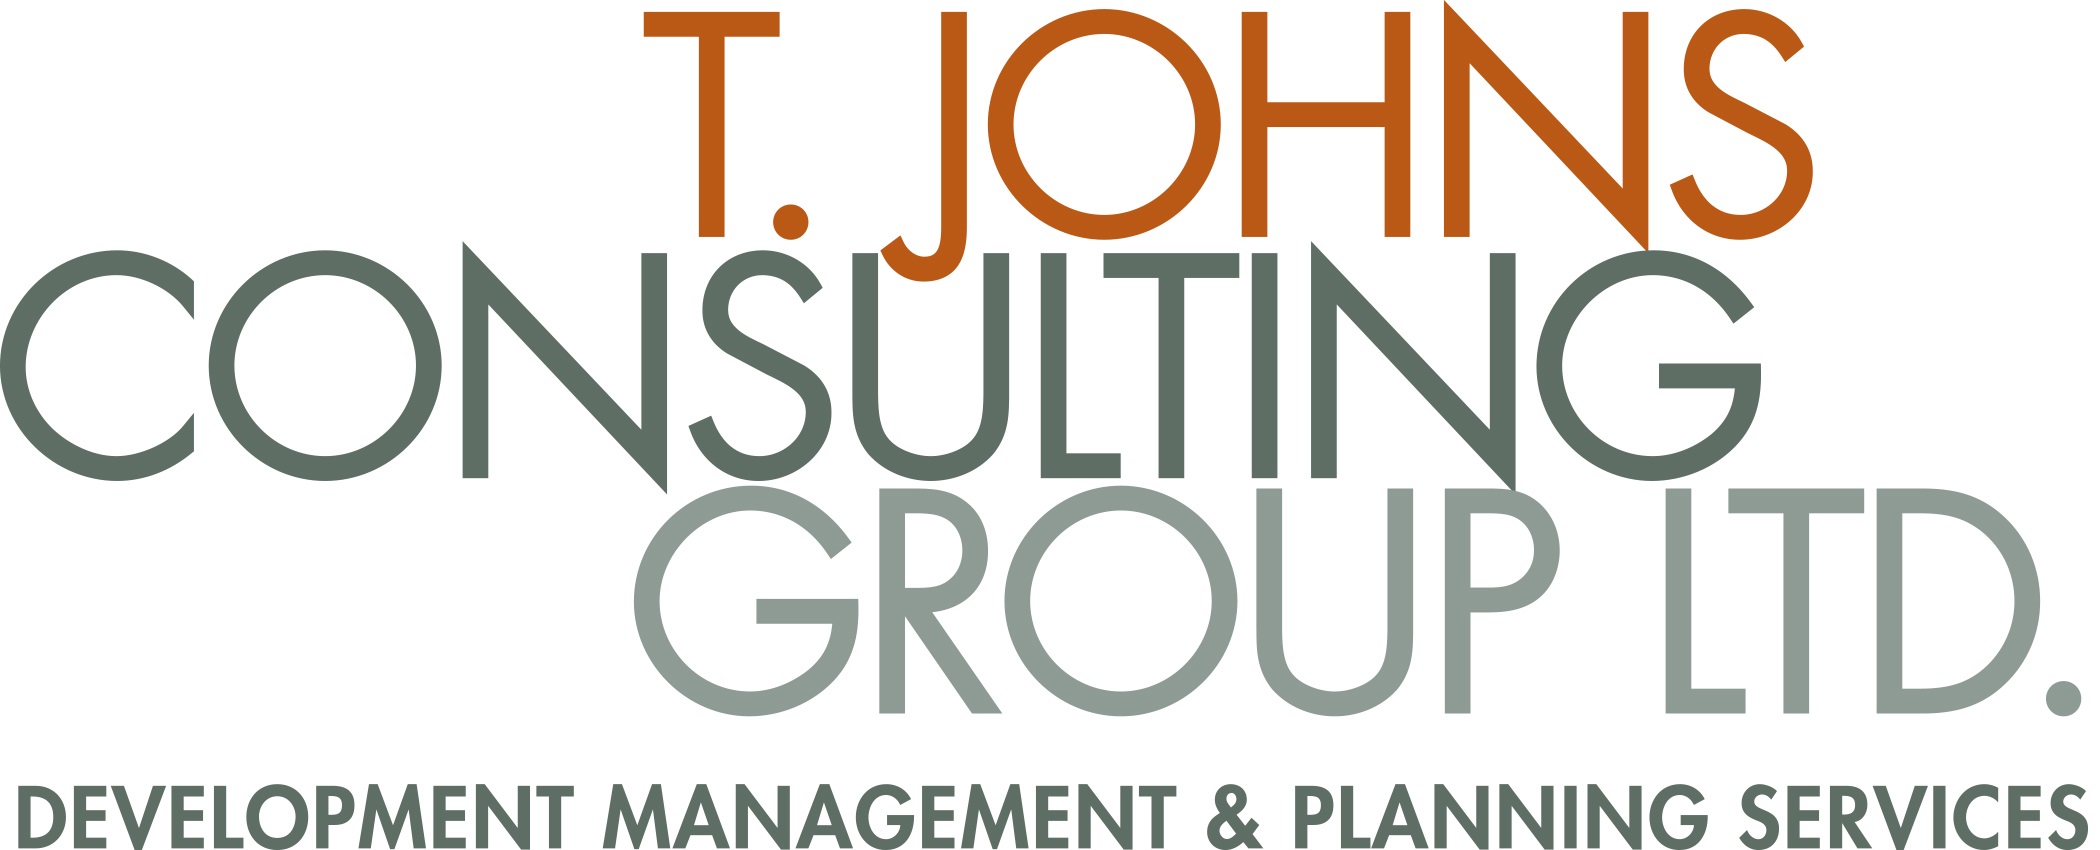 T. Johns Consulting Group Ltd.